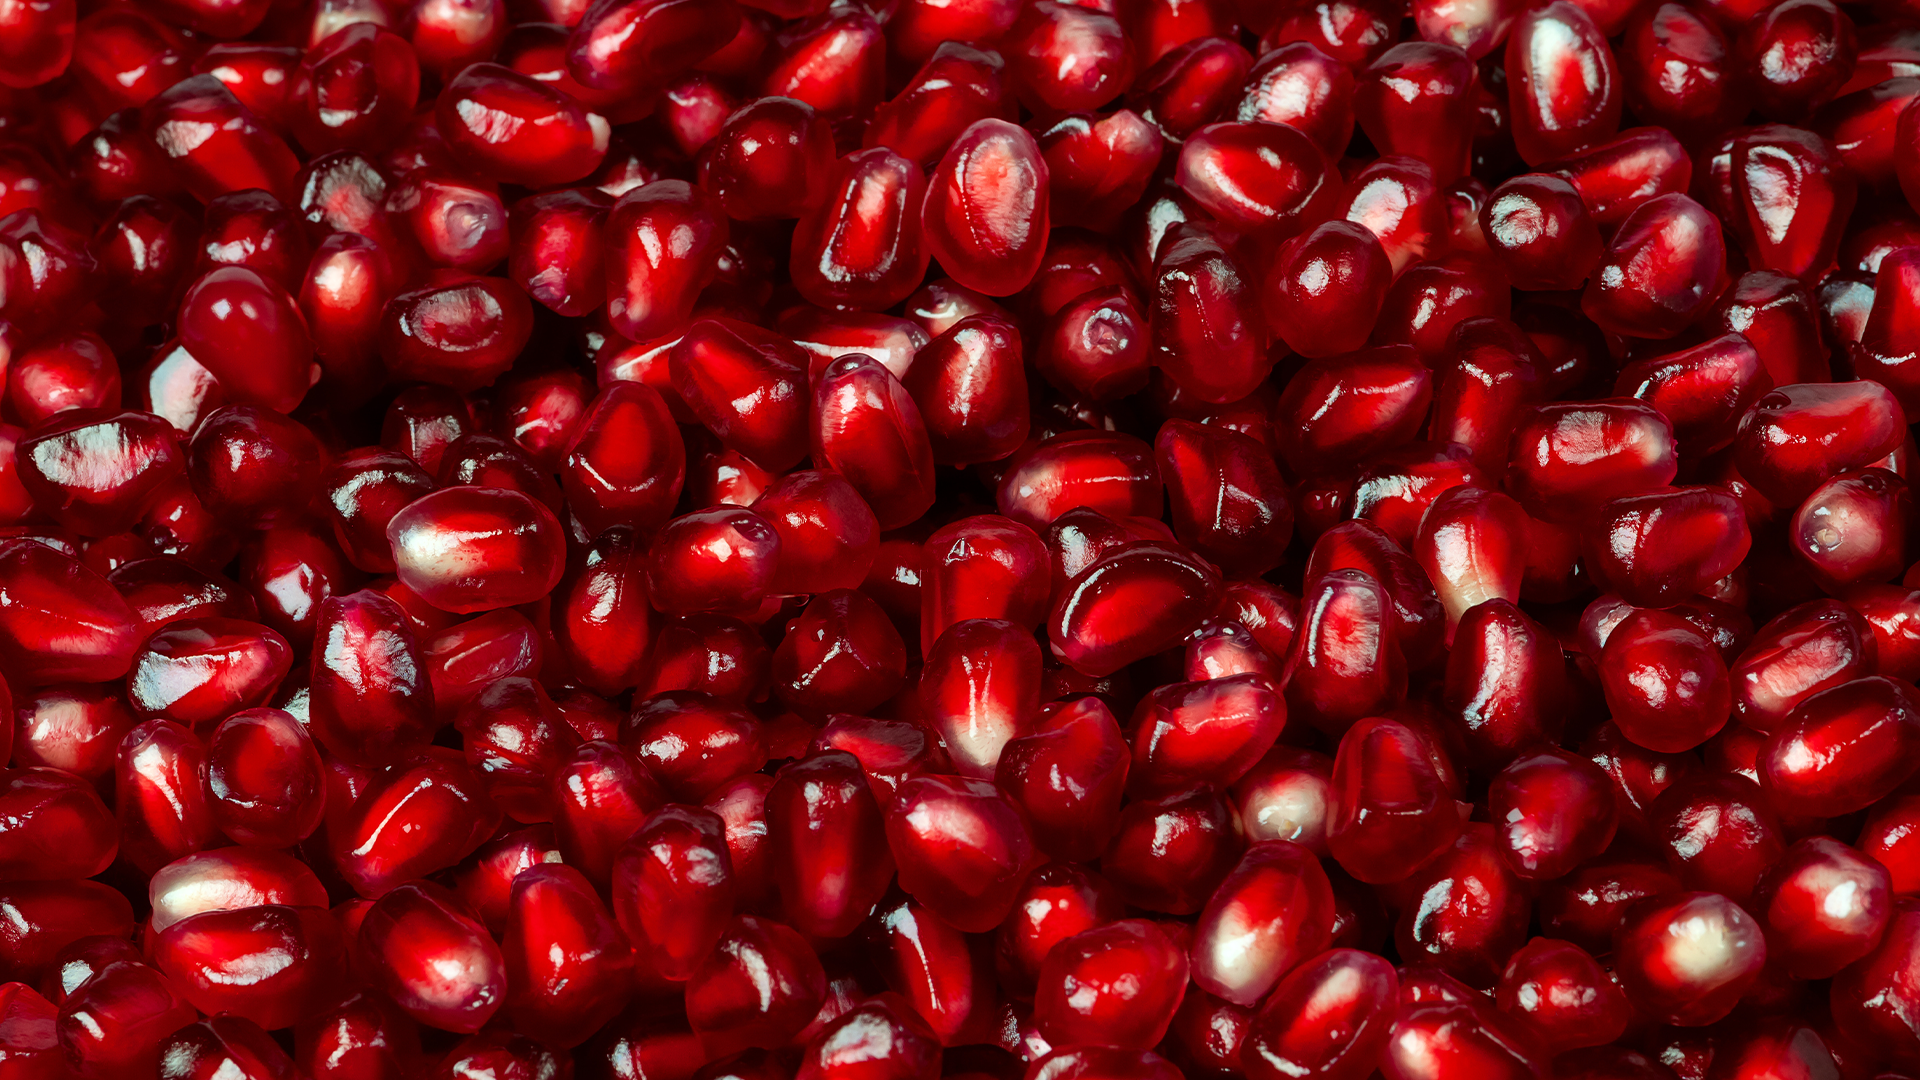 Pomegranate: what is it, and how does it impact testosterone?